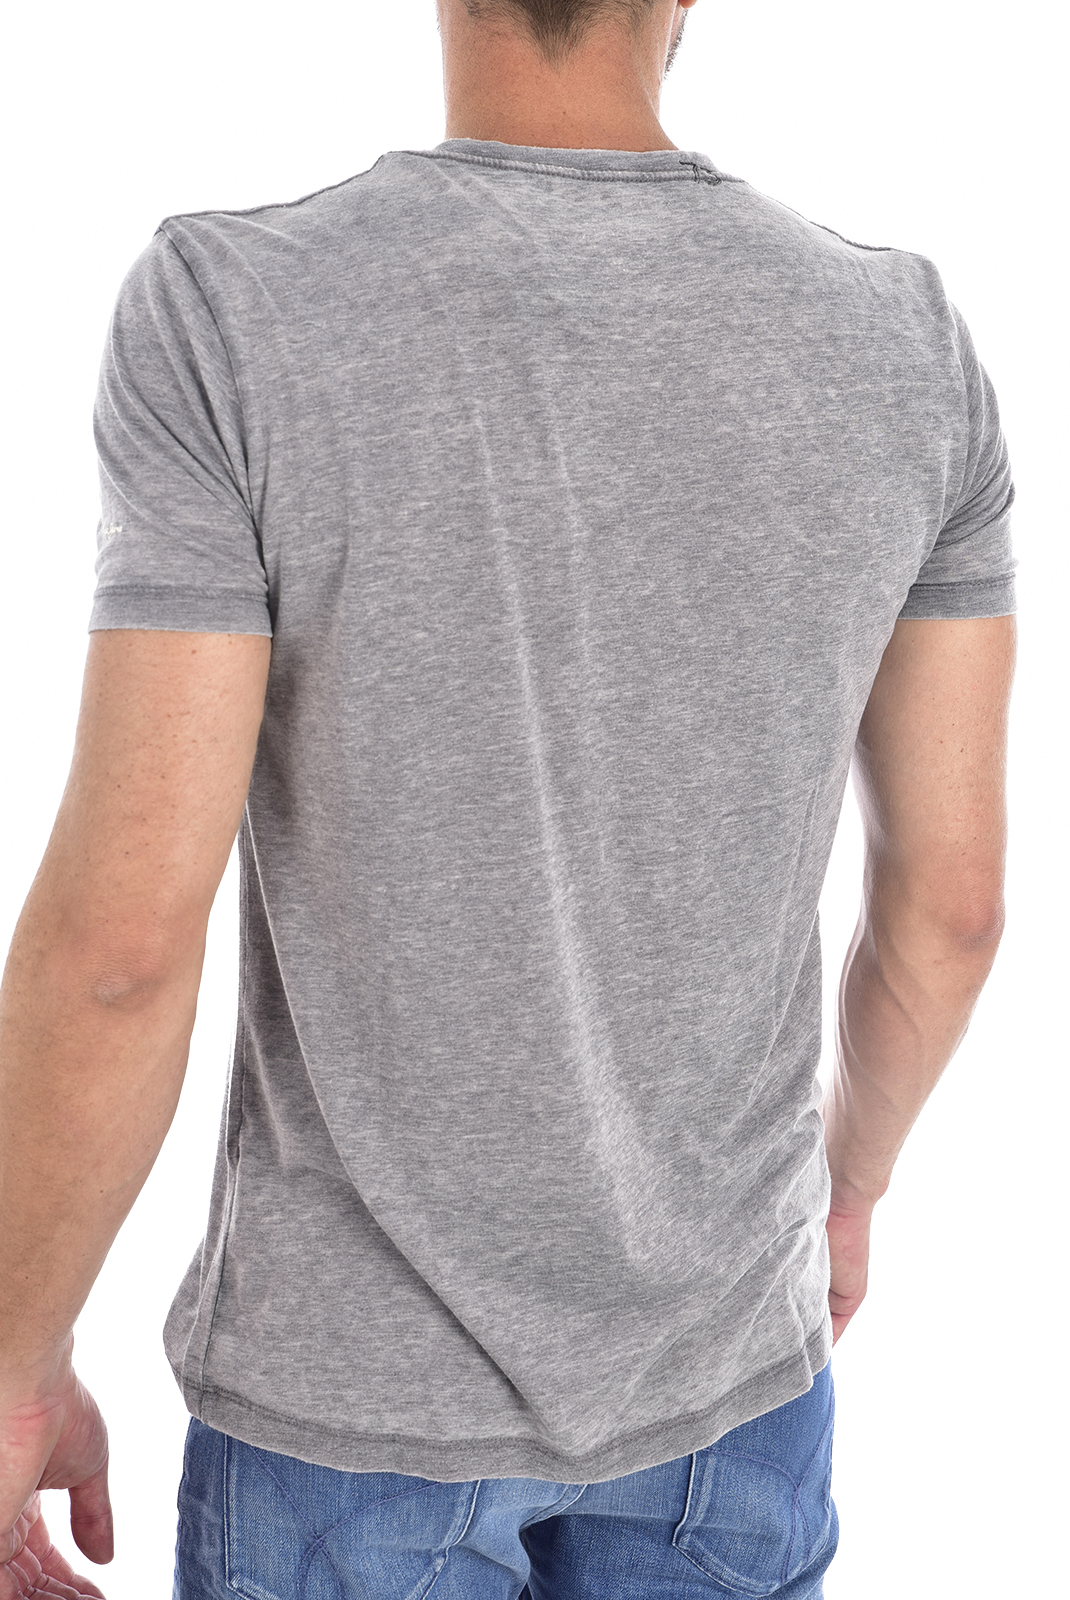 Tee-shirt gris homme sérigraphie - Pepe Jeans Pm503230